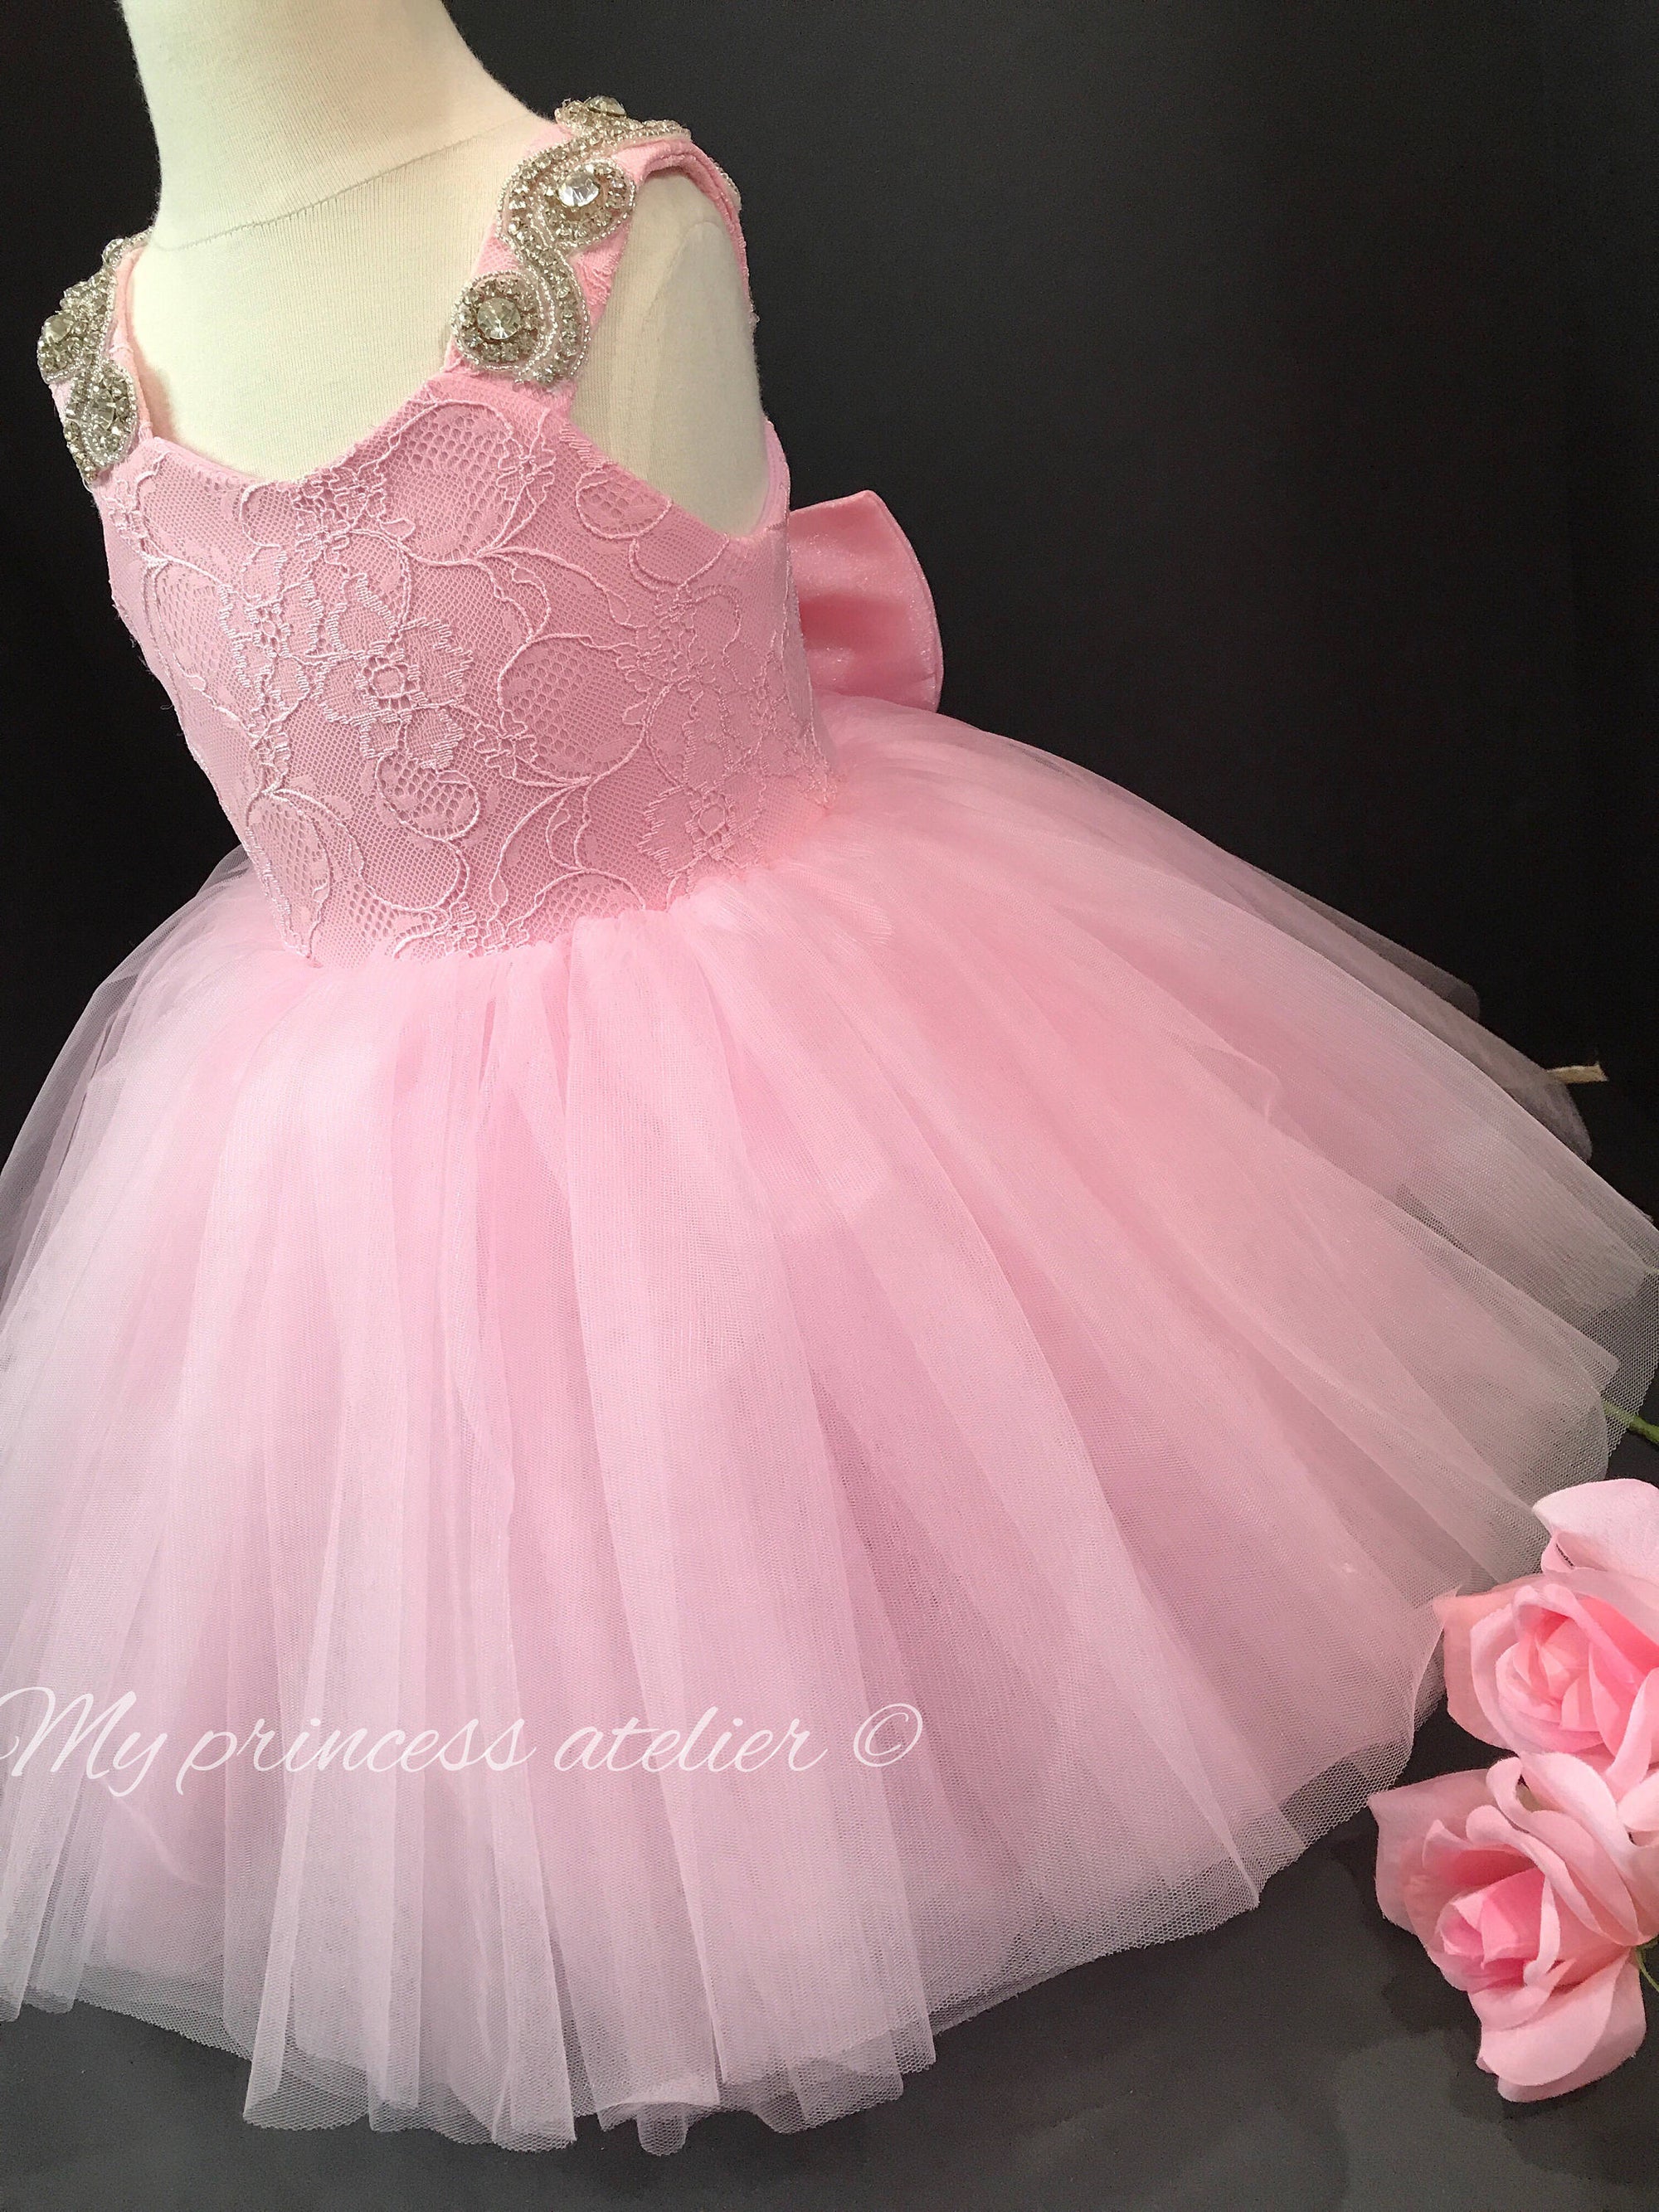 2023 White Baptism First Birthday Dress For Baby Girl Clothes Bow Princess  Dresses Sequin Party Girls Costume Ball Gown 231226 From Zhi08, $41.87 |  DHgate.Com